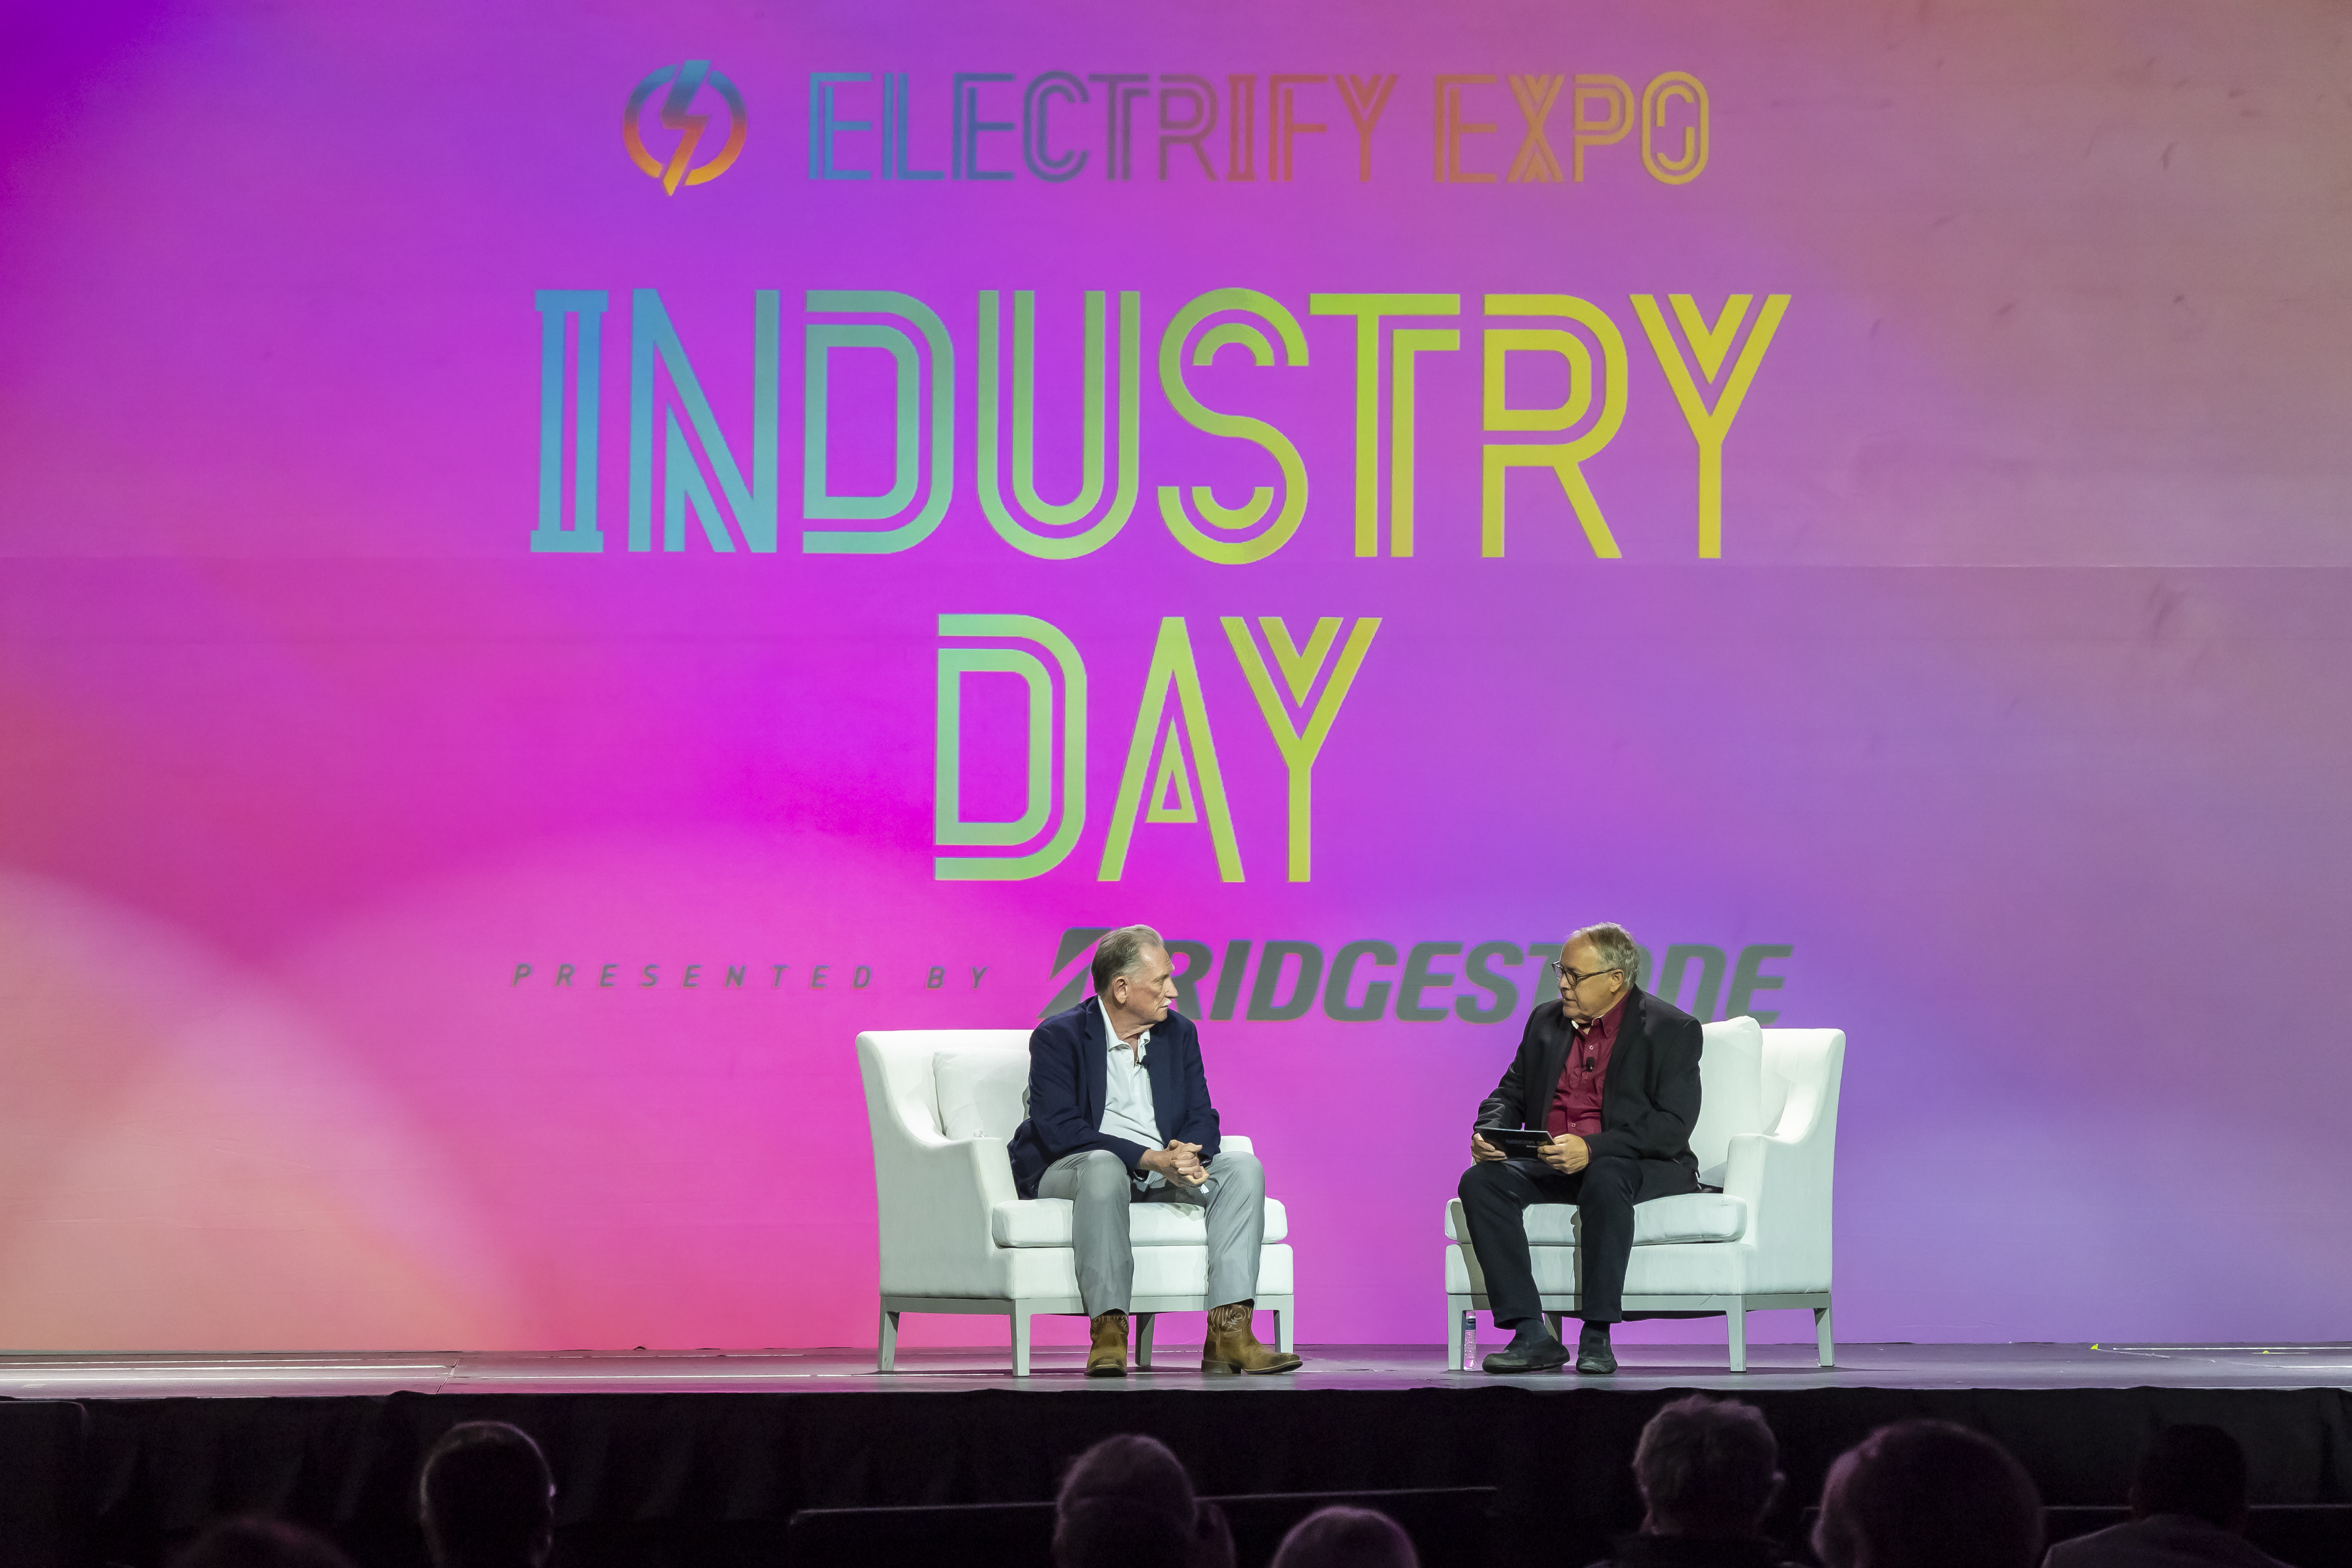 Sandy Munro on stage at Industry Day